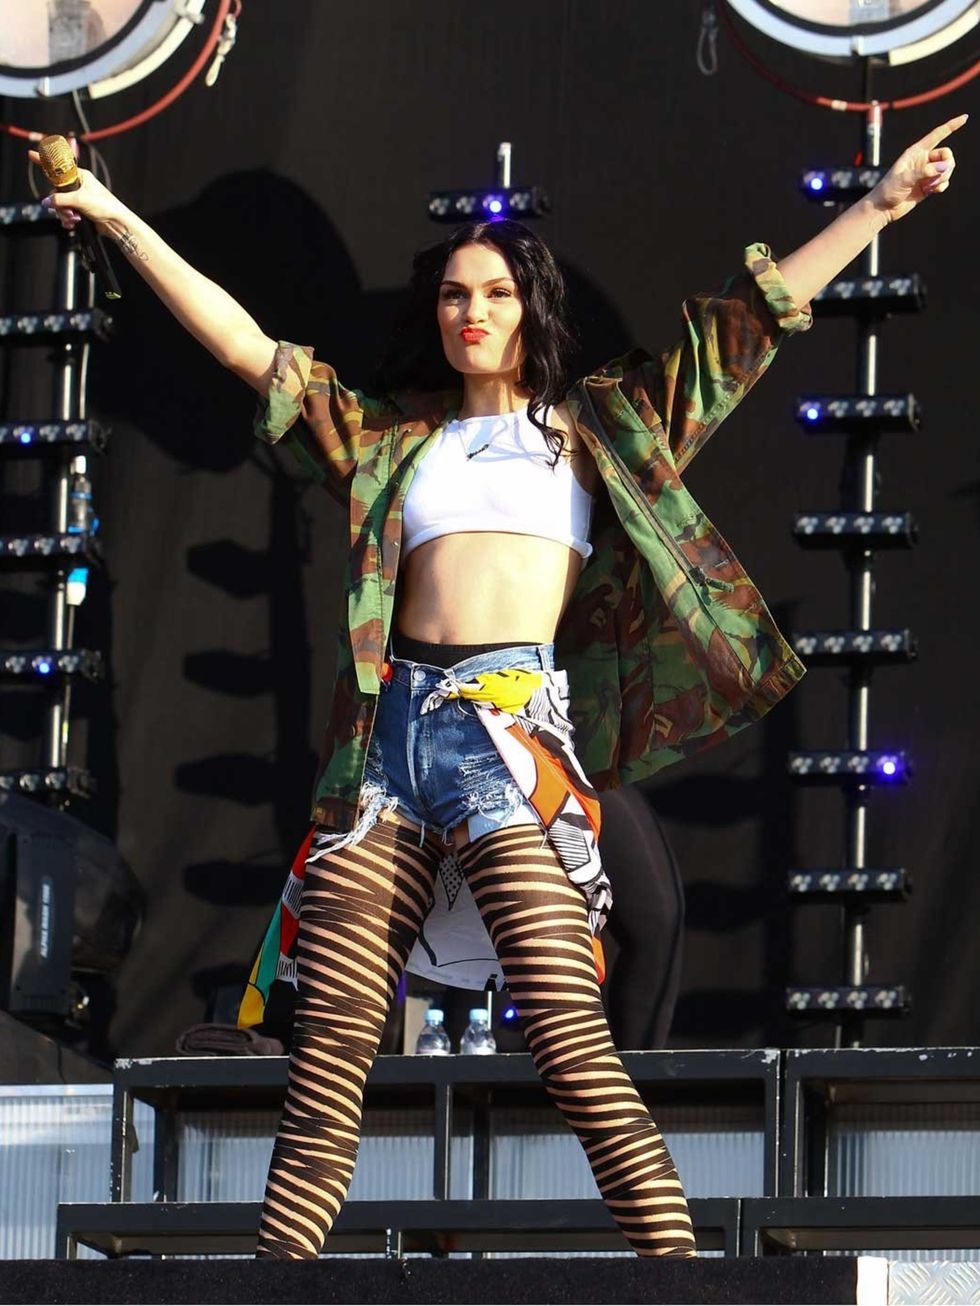 <p>Jessie J at the 2012 Wireless festival in Hyde Park, London. She sang hits including Domino and Lazerlight.</p>